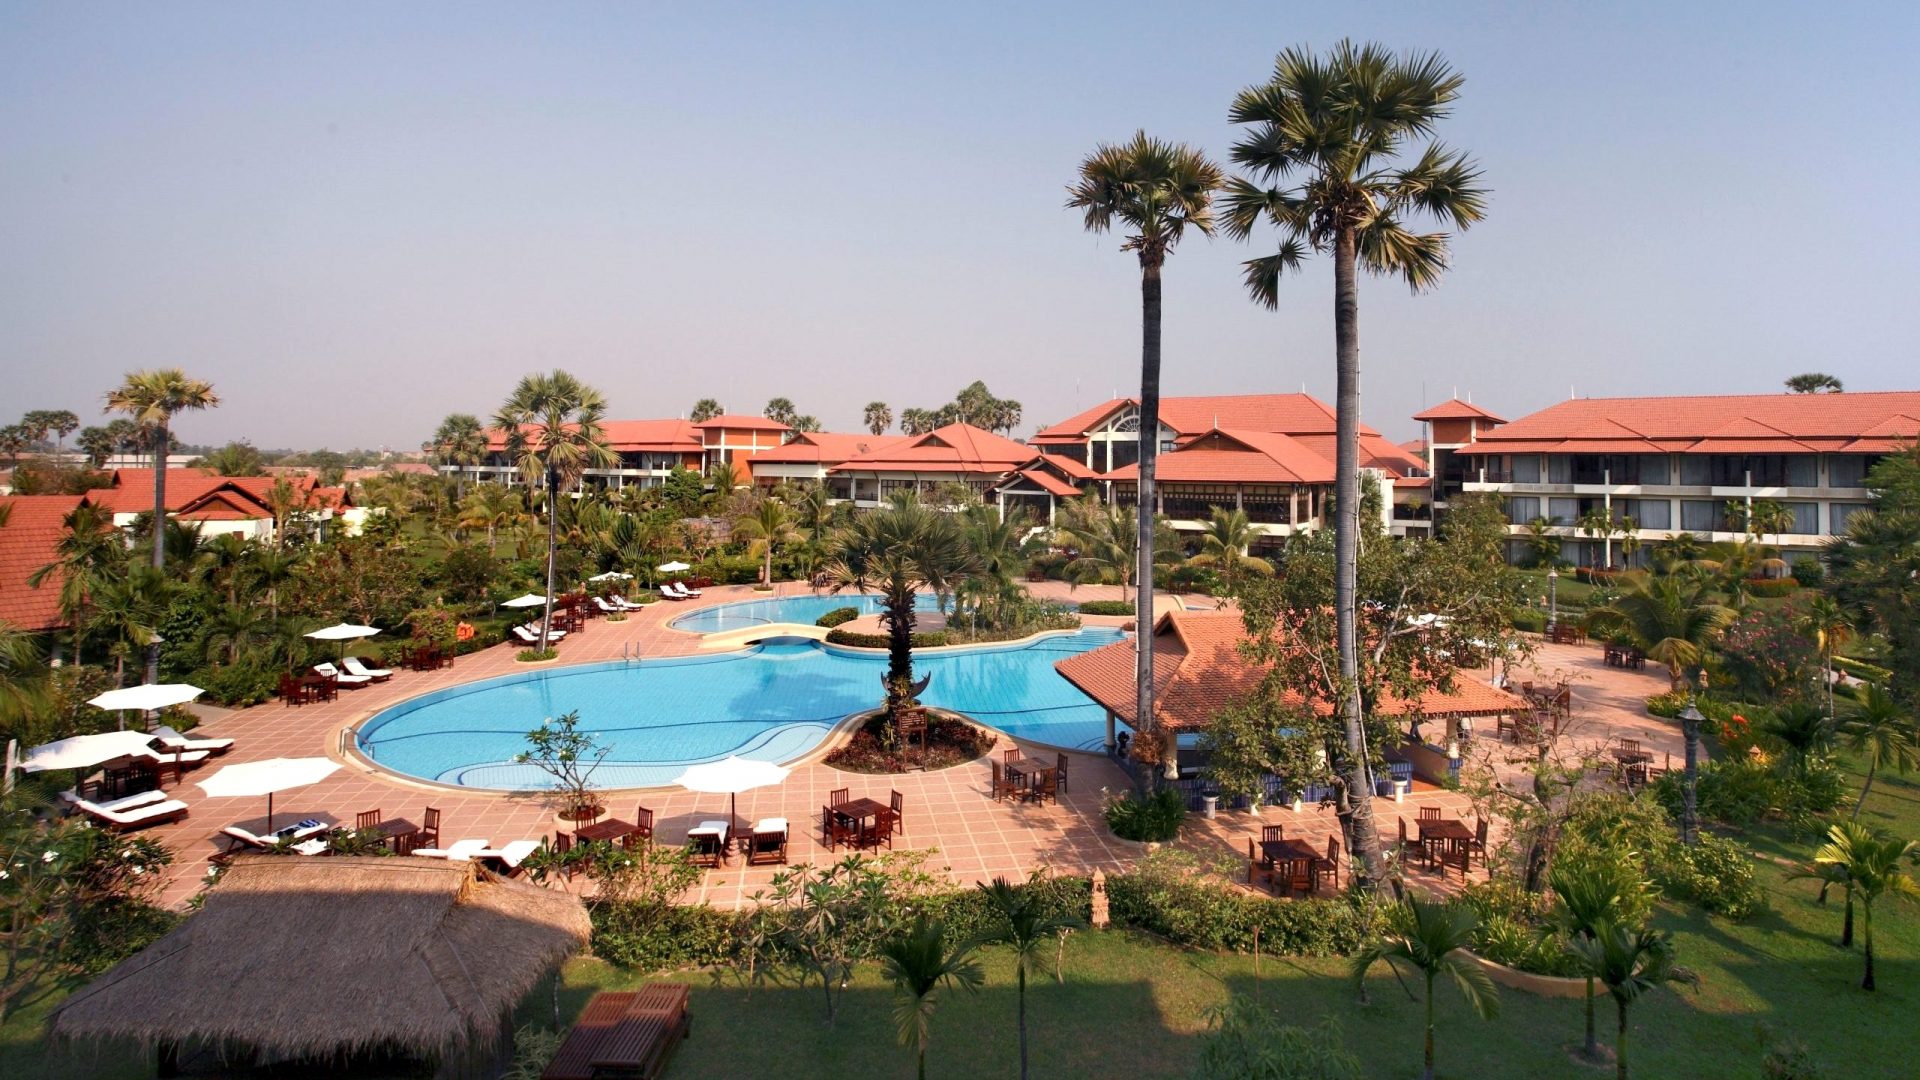 This Siem Reap Resort Is Perfect for Your Next Corporate Event